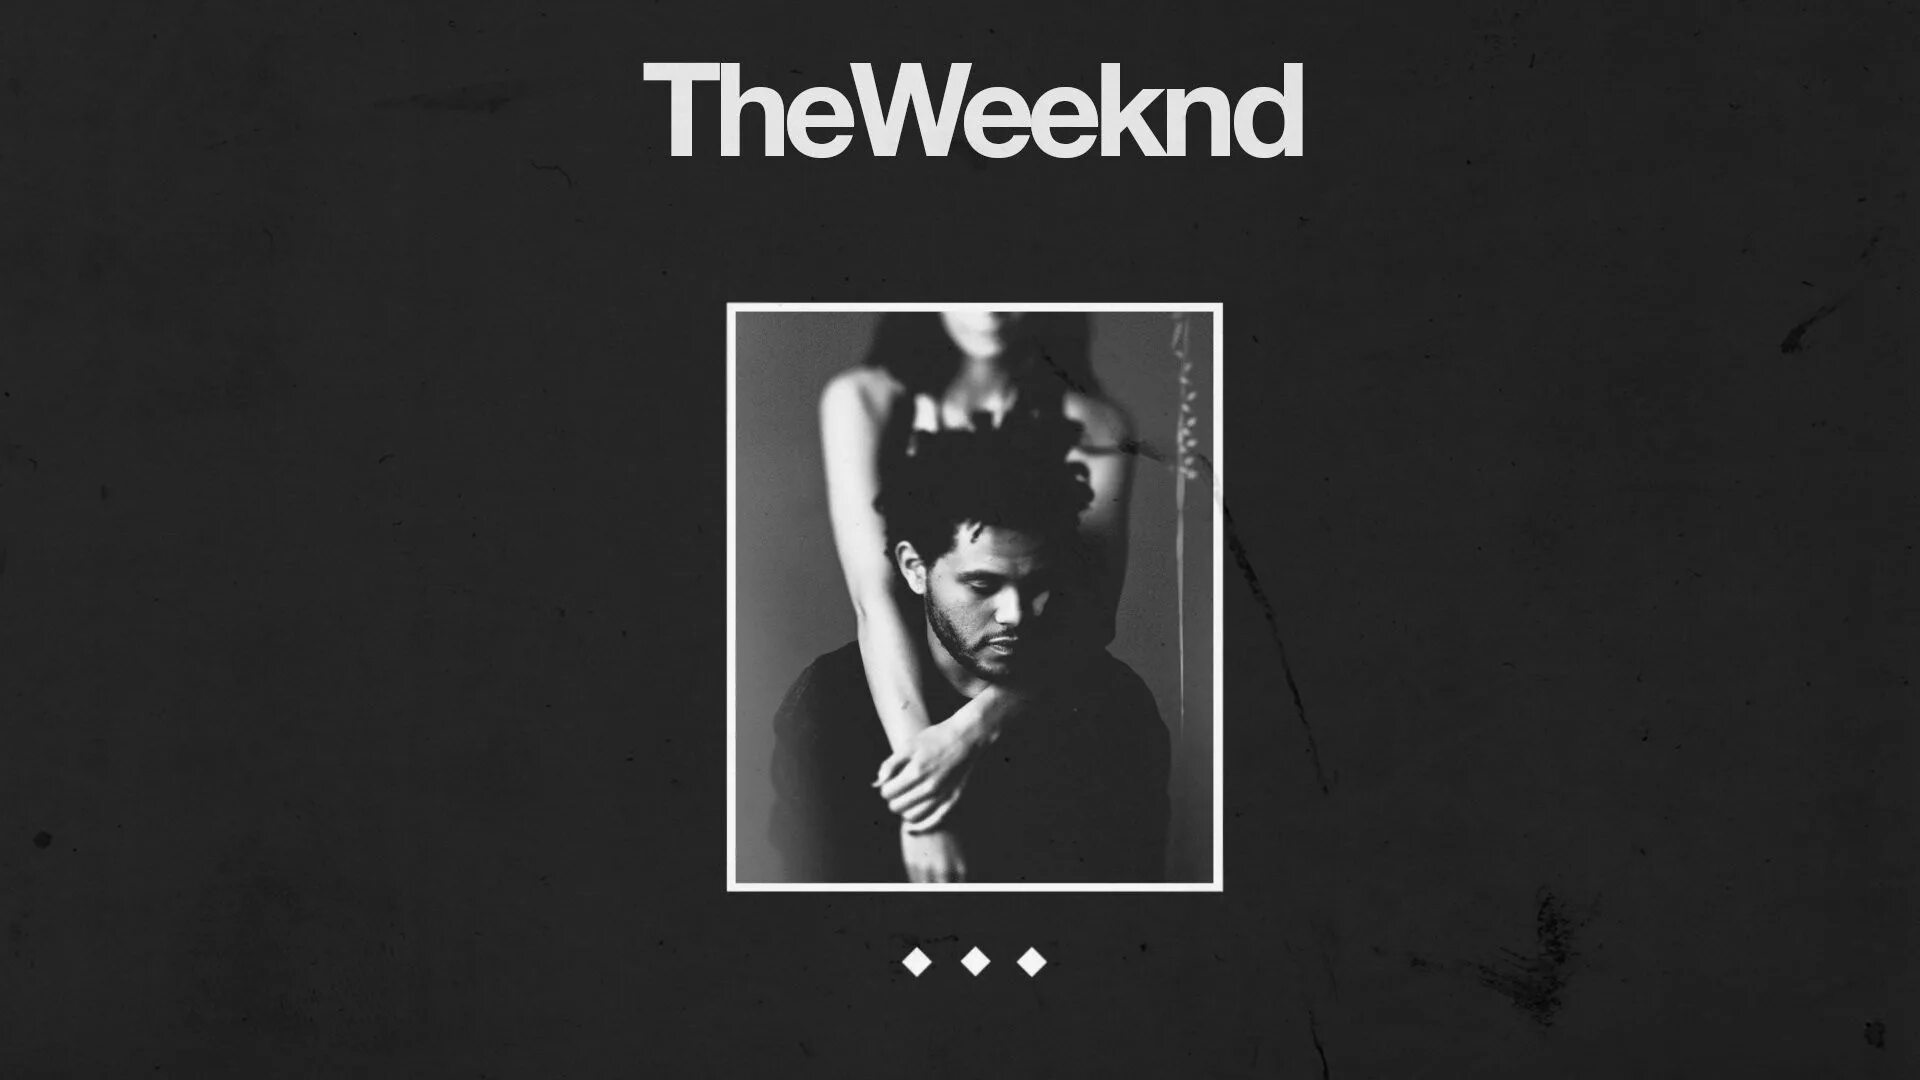 The Weeknd. The Weeknd Trilogy обложка. The Weeknd обложка альбома. The Weeknd фото. Песня the weeknd one of the girl